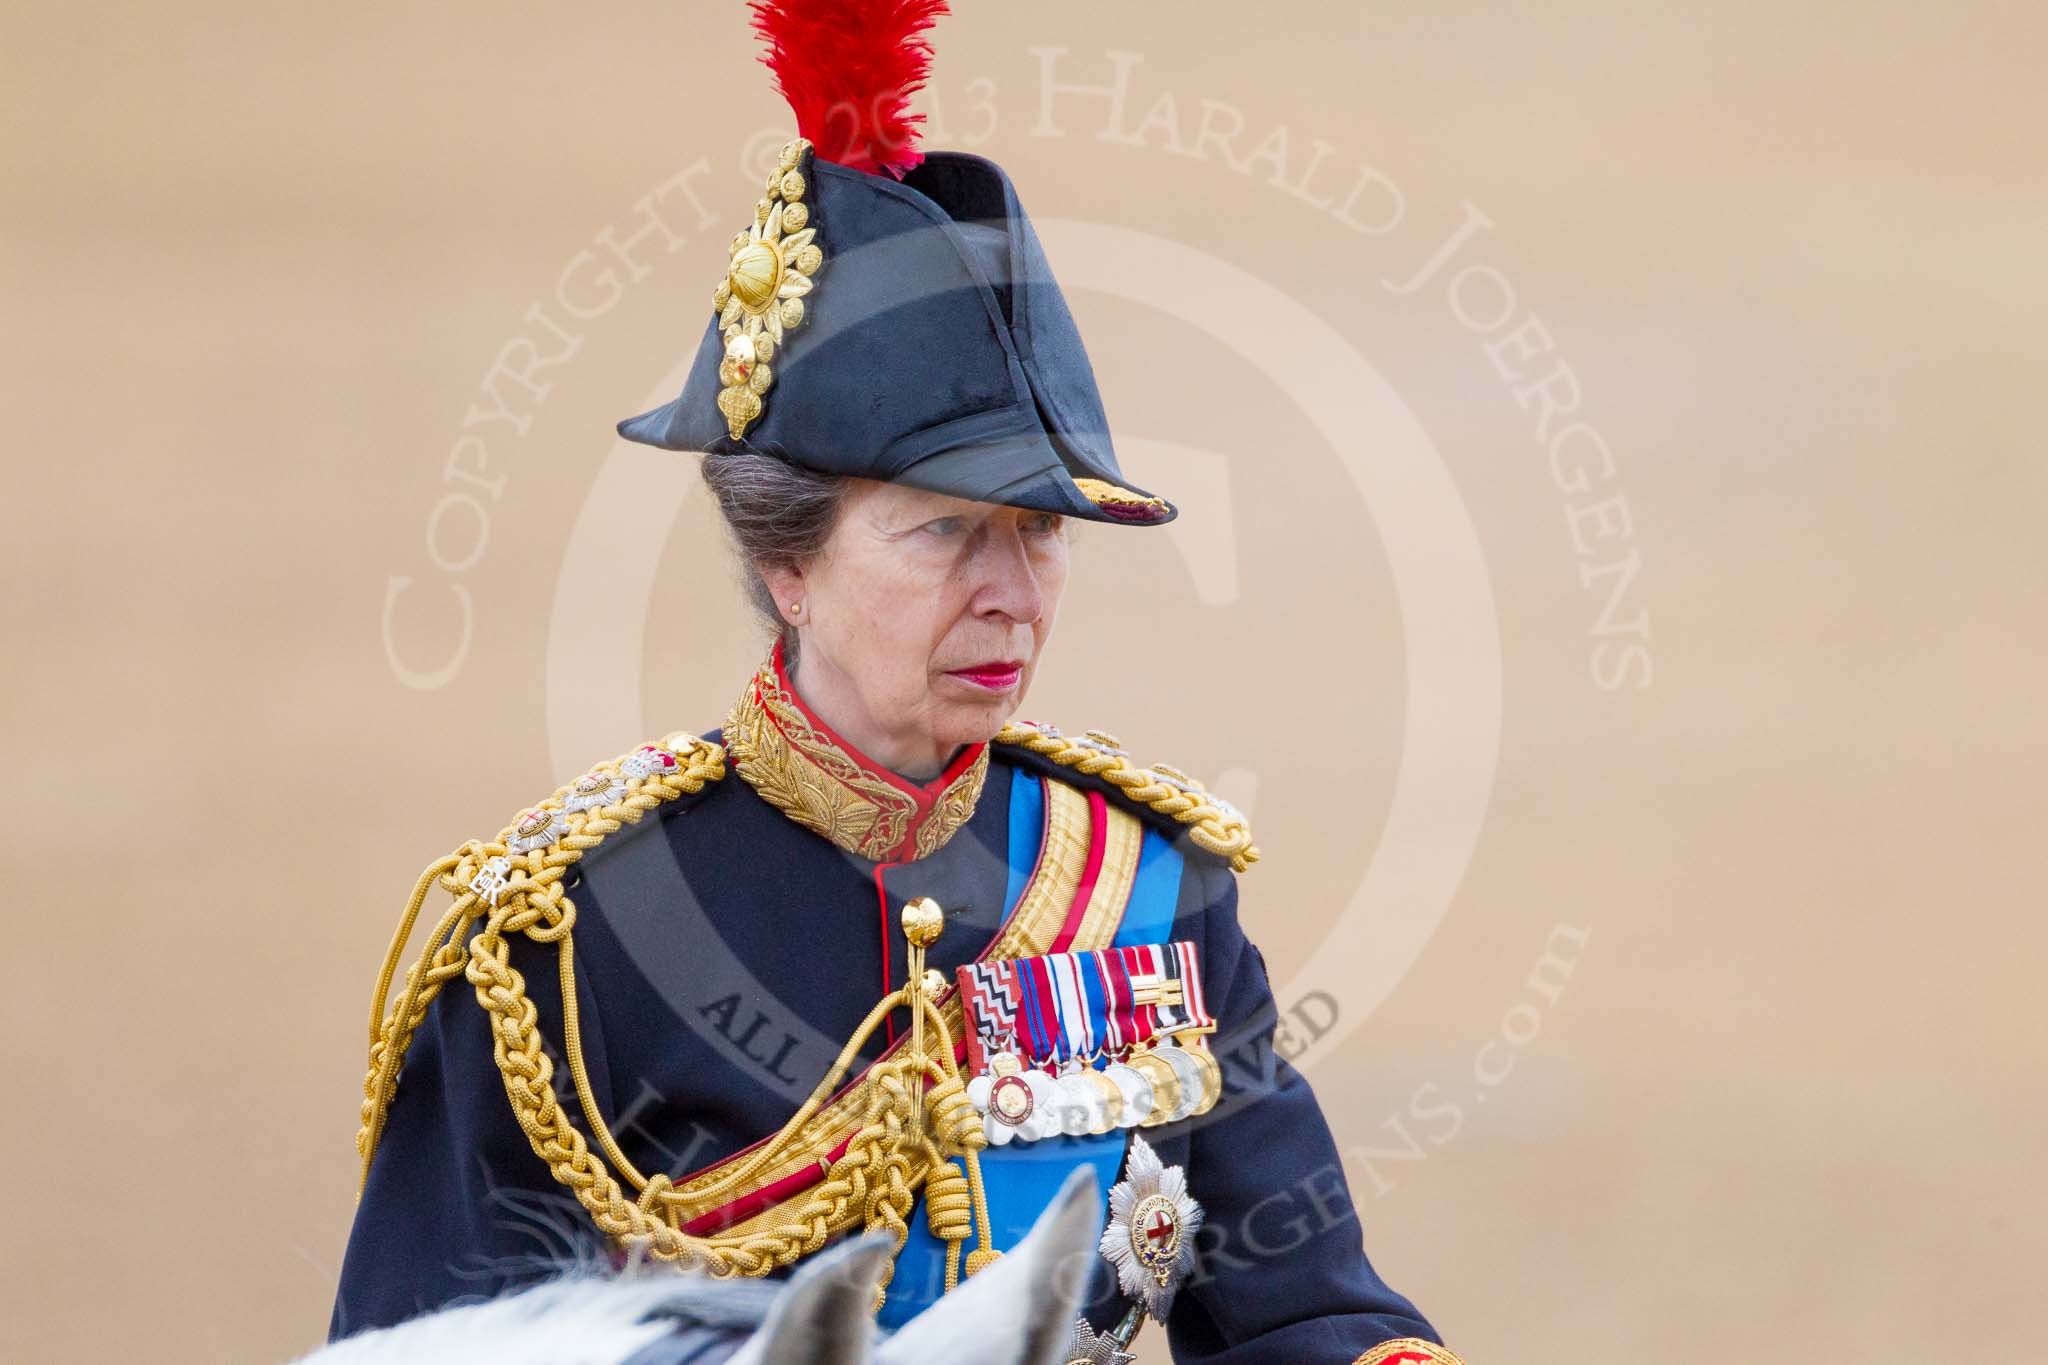 Trooping the Colour 2015. Image #312, 13 June 2015 11:05 Horse Guards Parade, London, UK